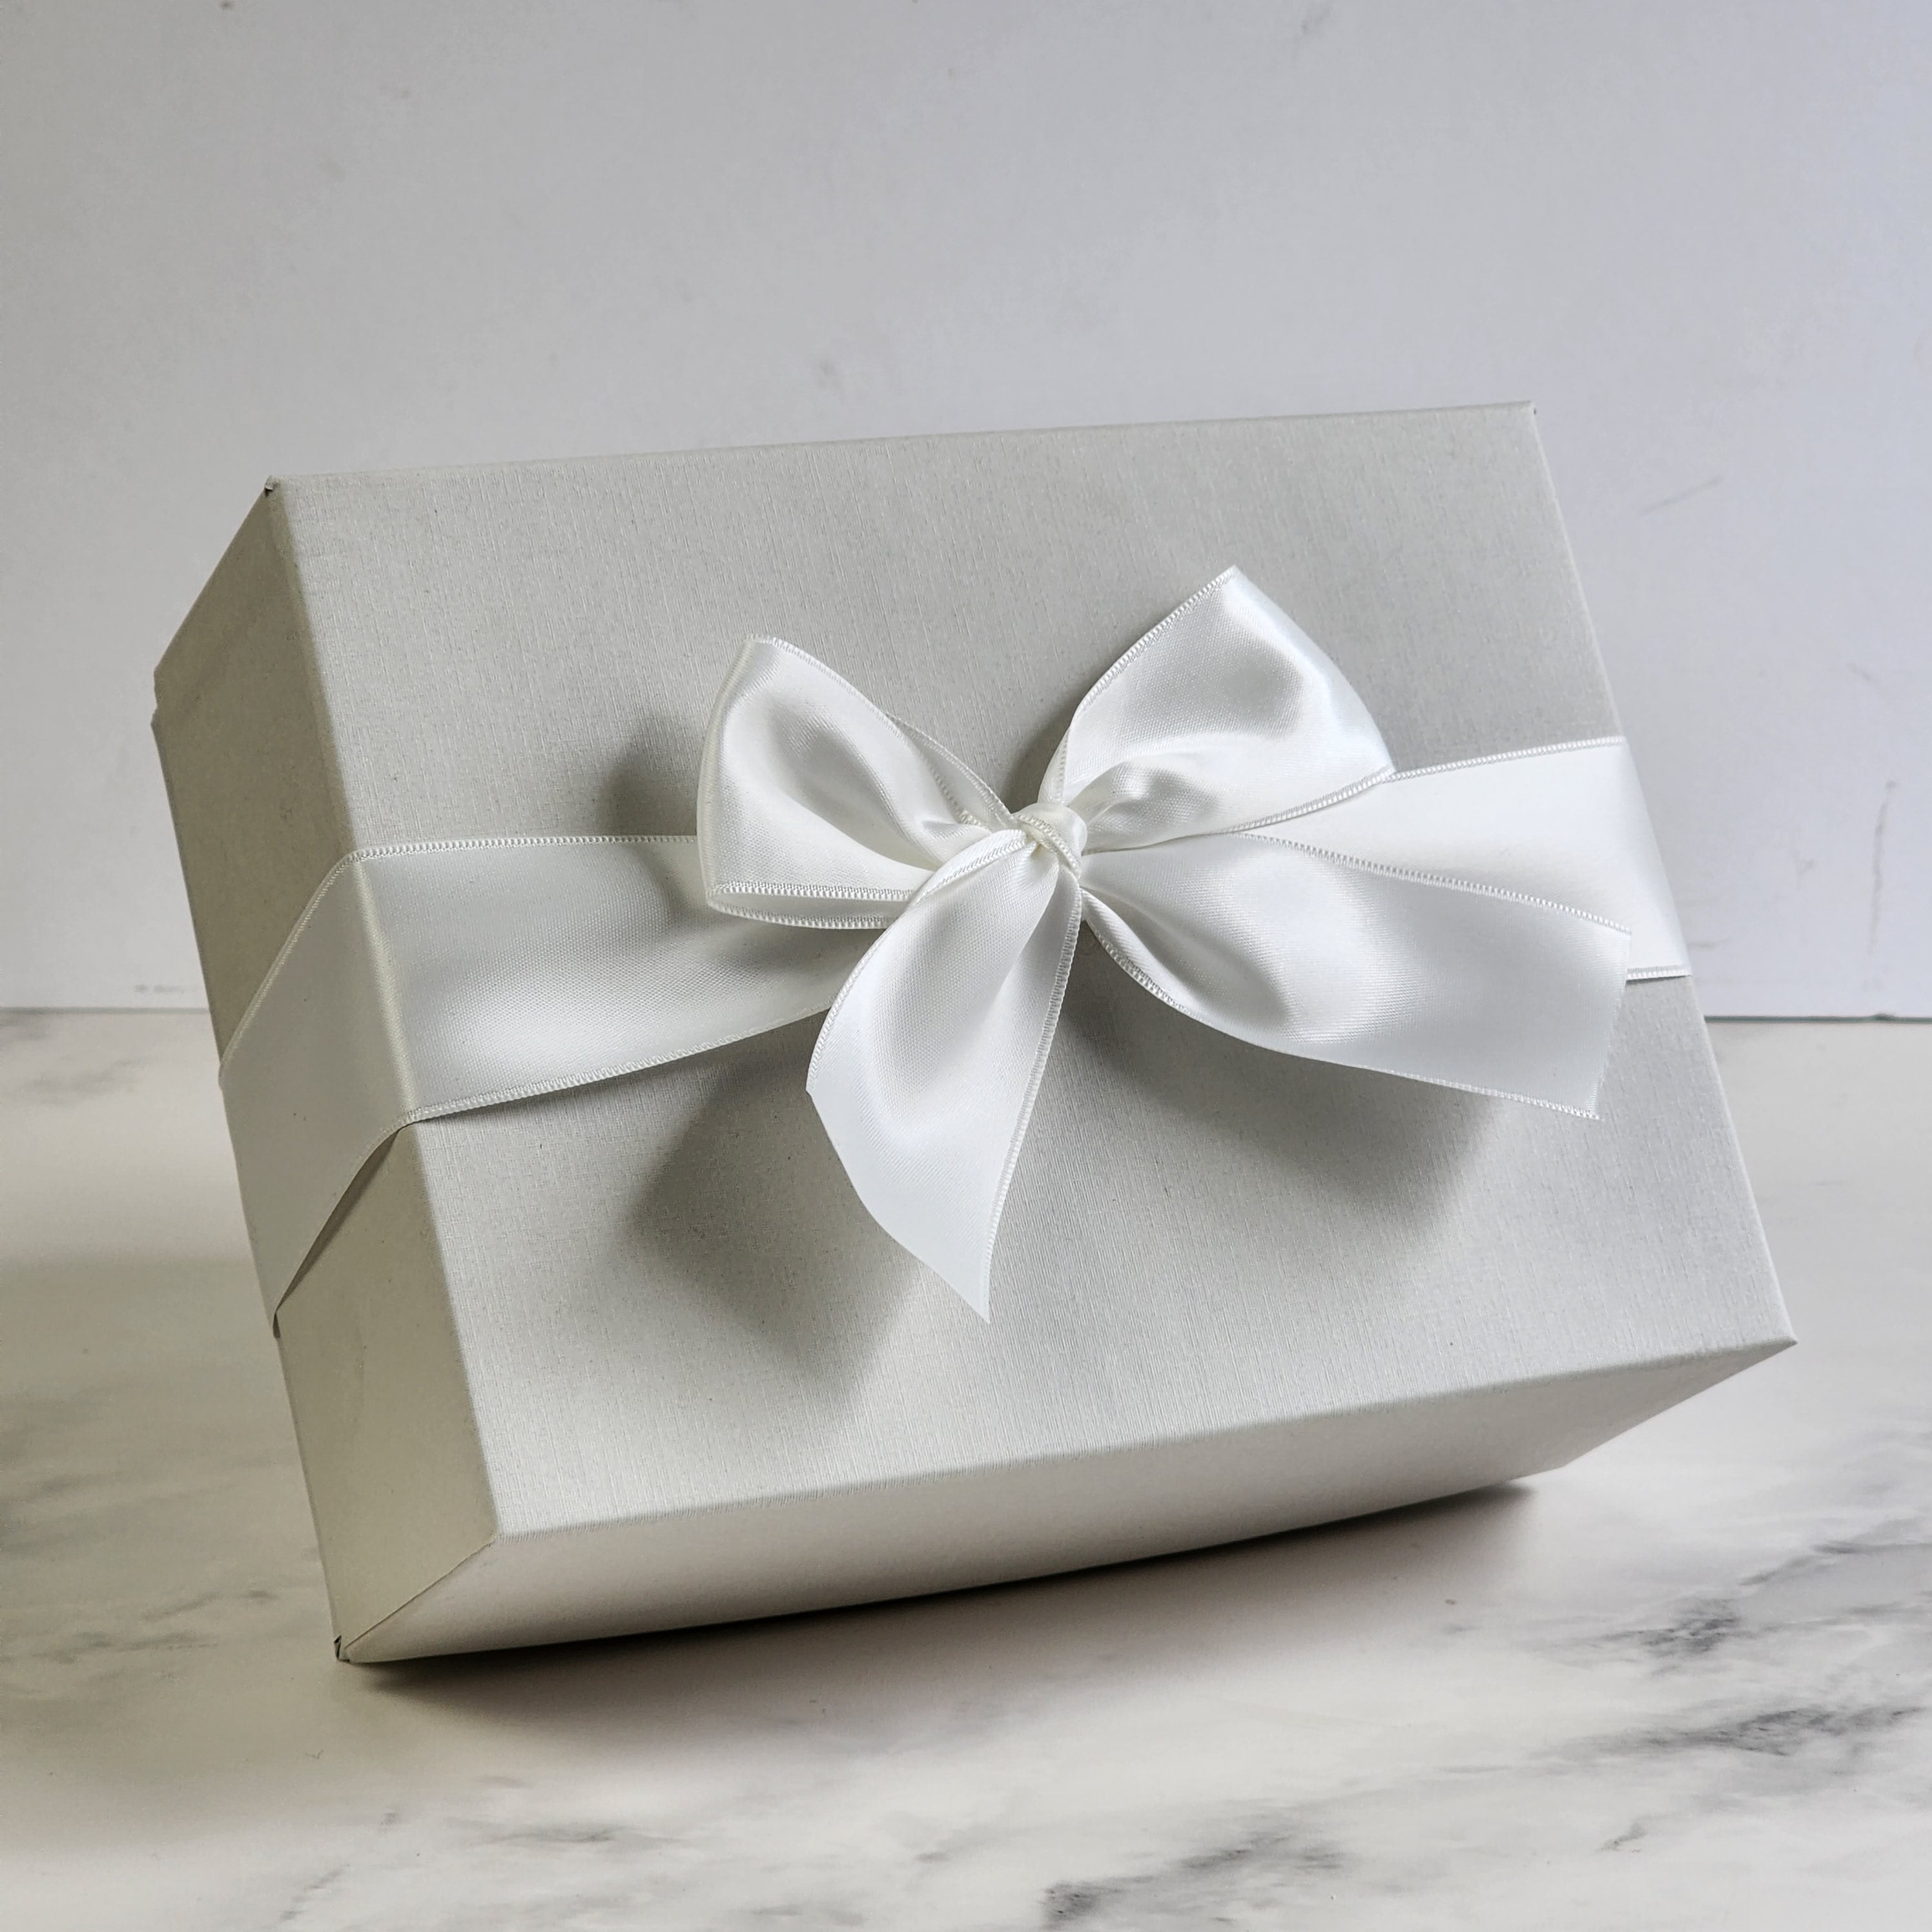 Amazon.com: Personalized Gift Box with Floral Initial and Name |  Personalized Wrapping | Keepsake Box | Mother's Day Box | Great for  Weddings, Bridesmaids and Baby Showers : Health & Household